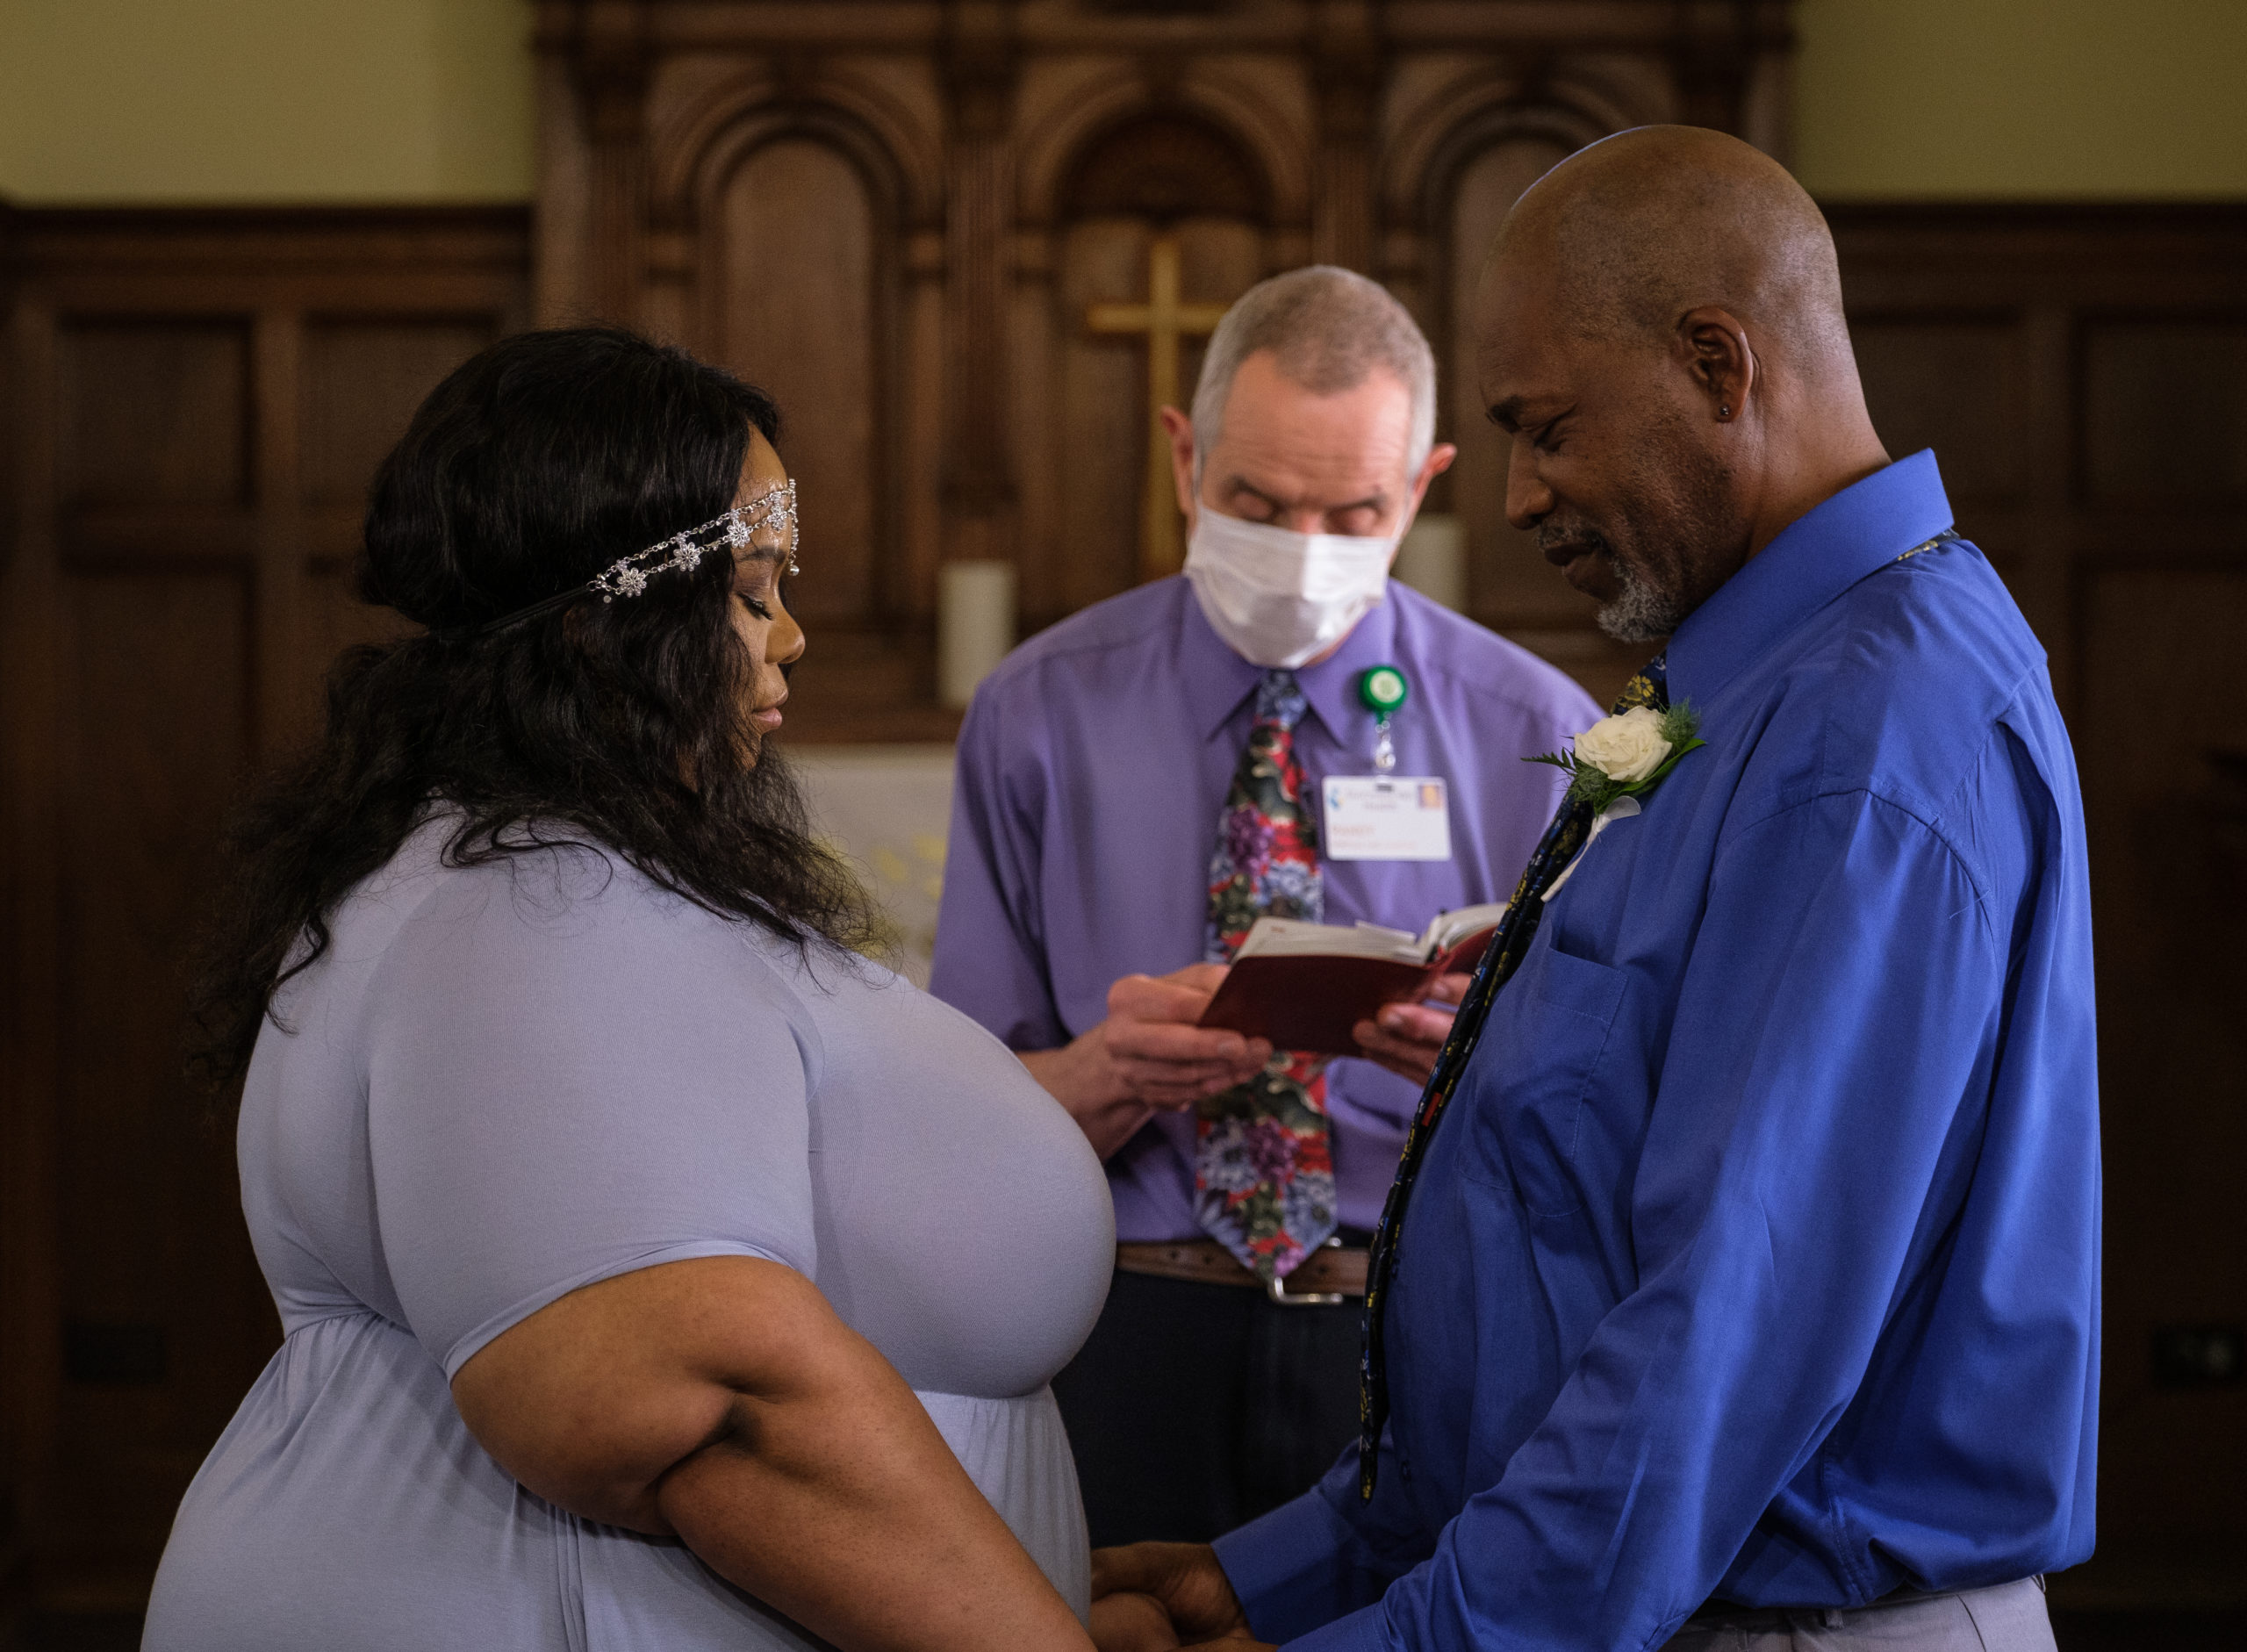 Melonie and Roderick getting married in the Stormont Vail Health chapel. 